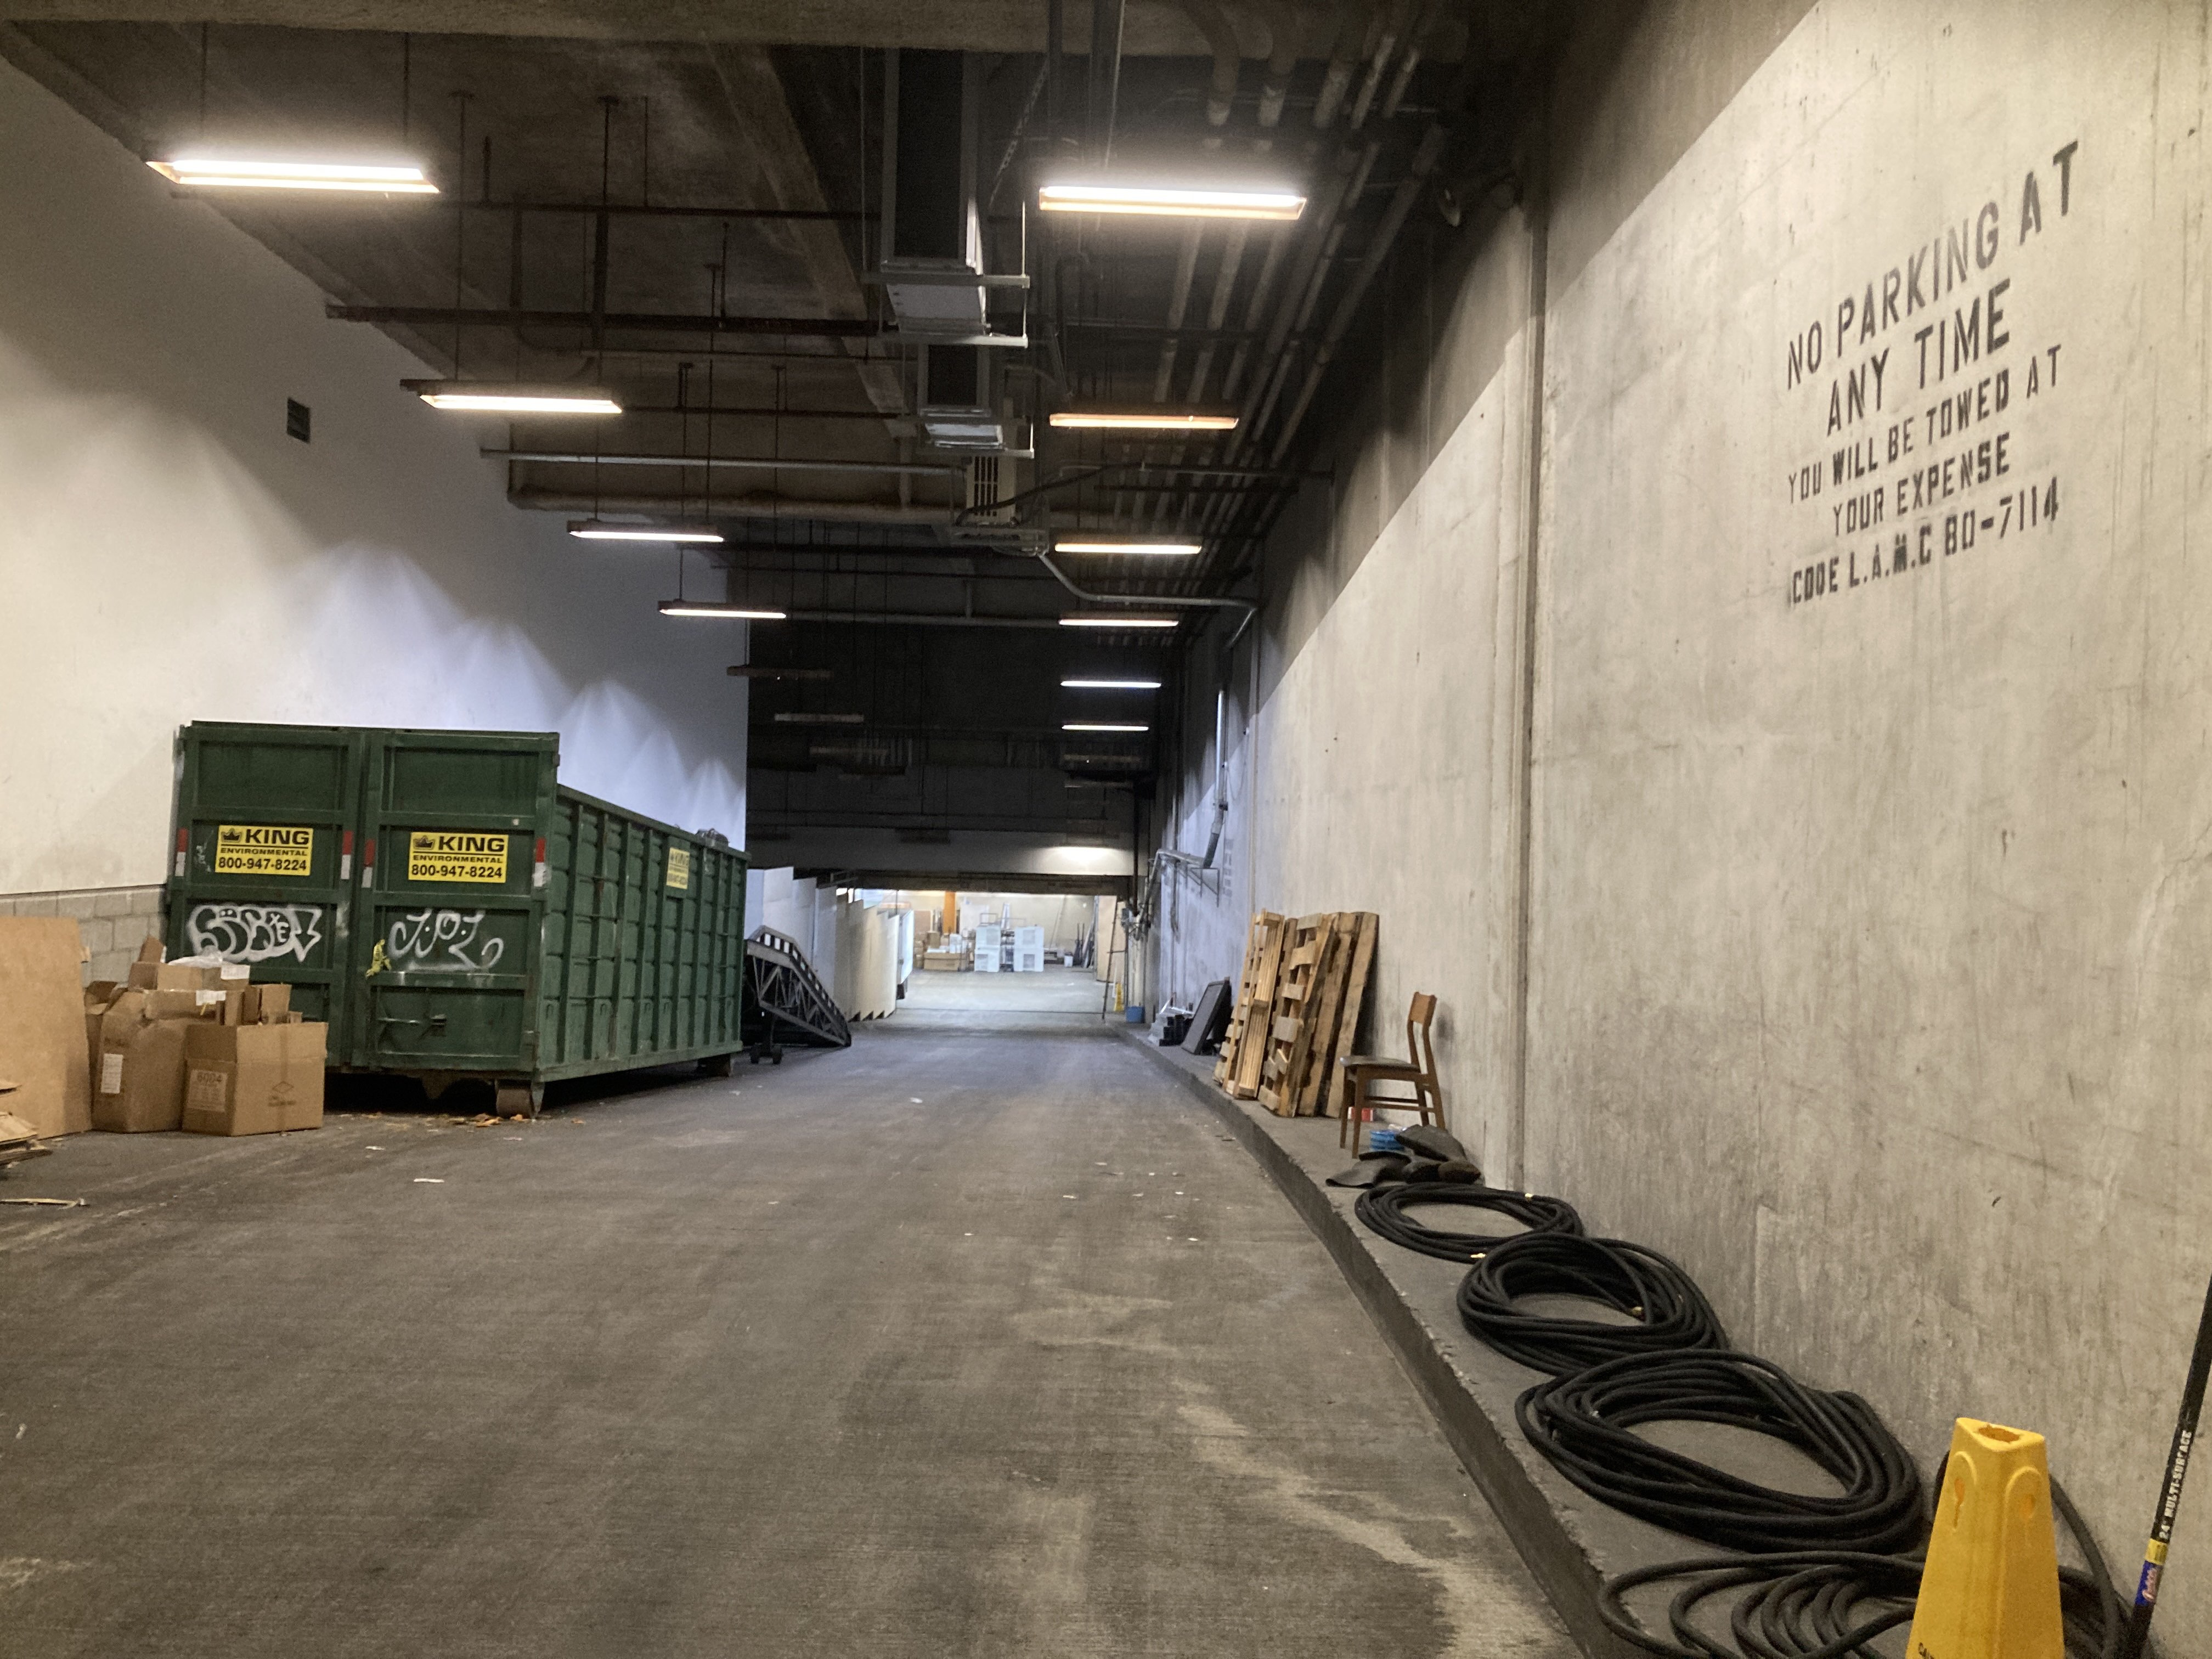 color photo looking into a ramp that goes down into a yellow-pillared room. a dumpster and some pallets are stored along the walls of the ramp.